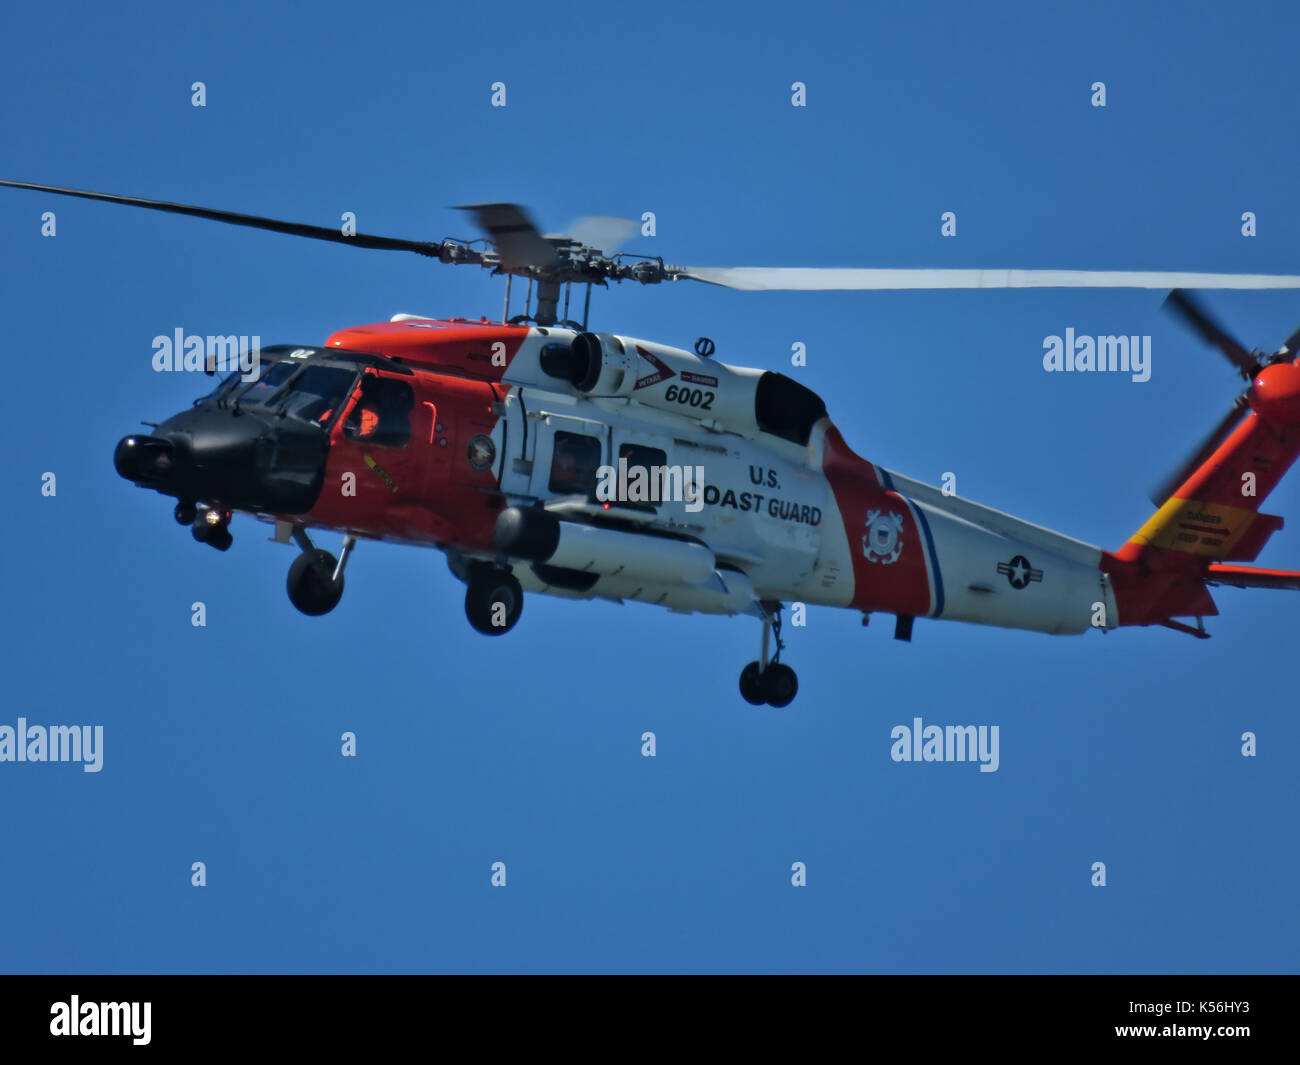 U.S. coast guard helicopter flying near Ocean Shores city in Washington state Stock Photo